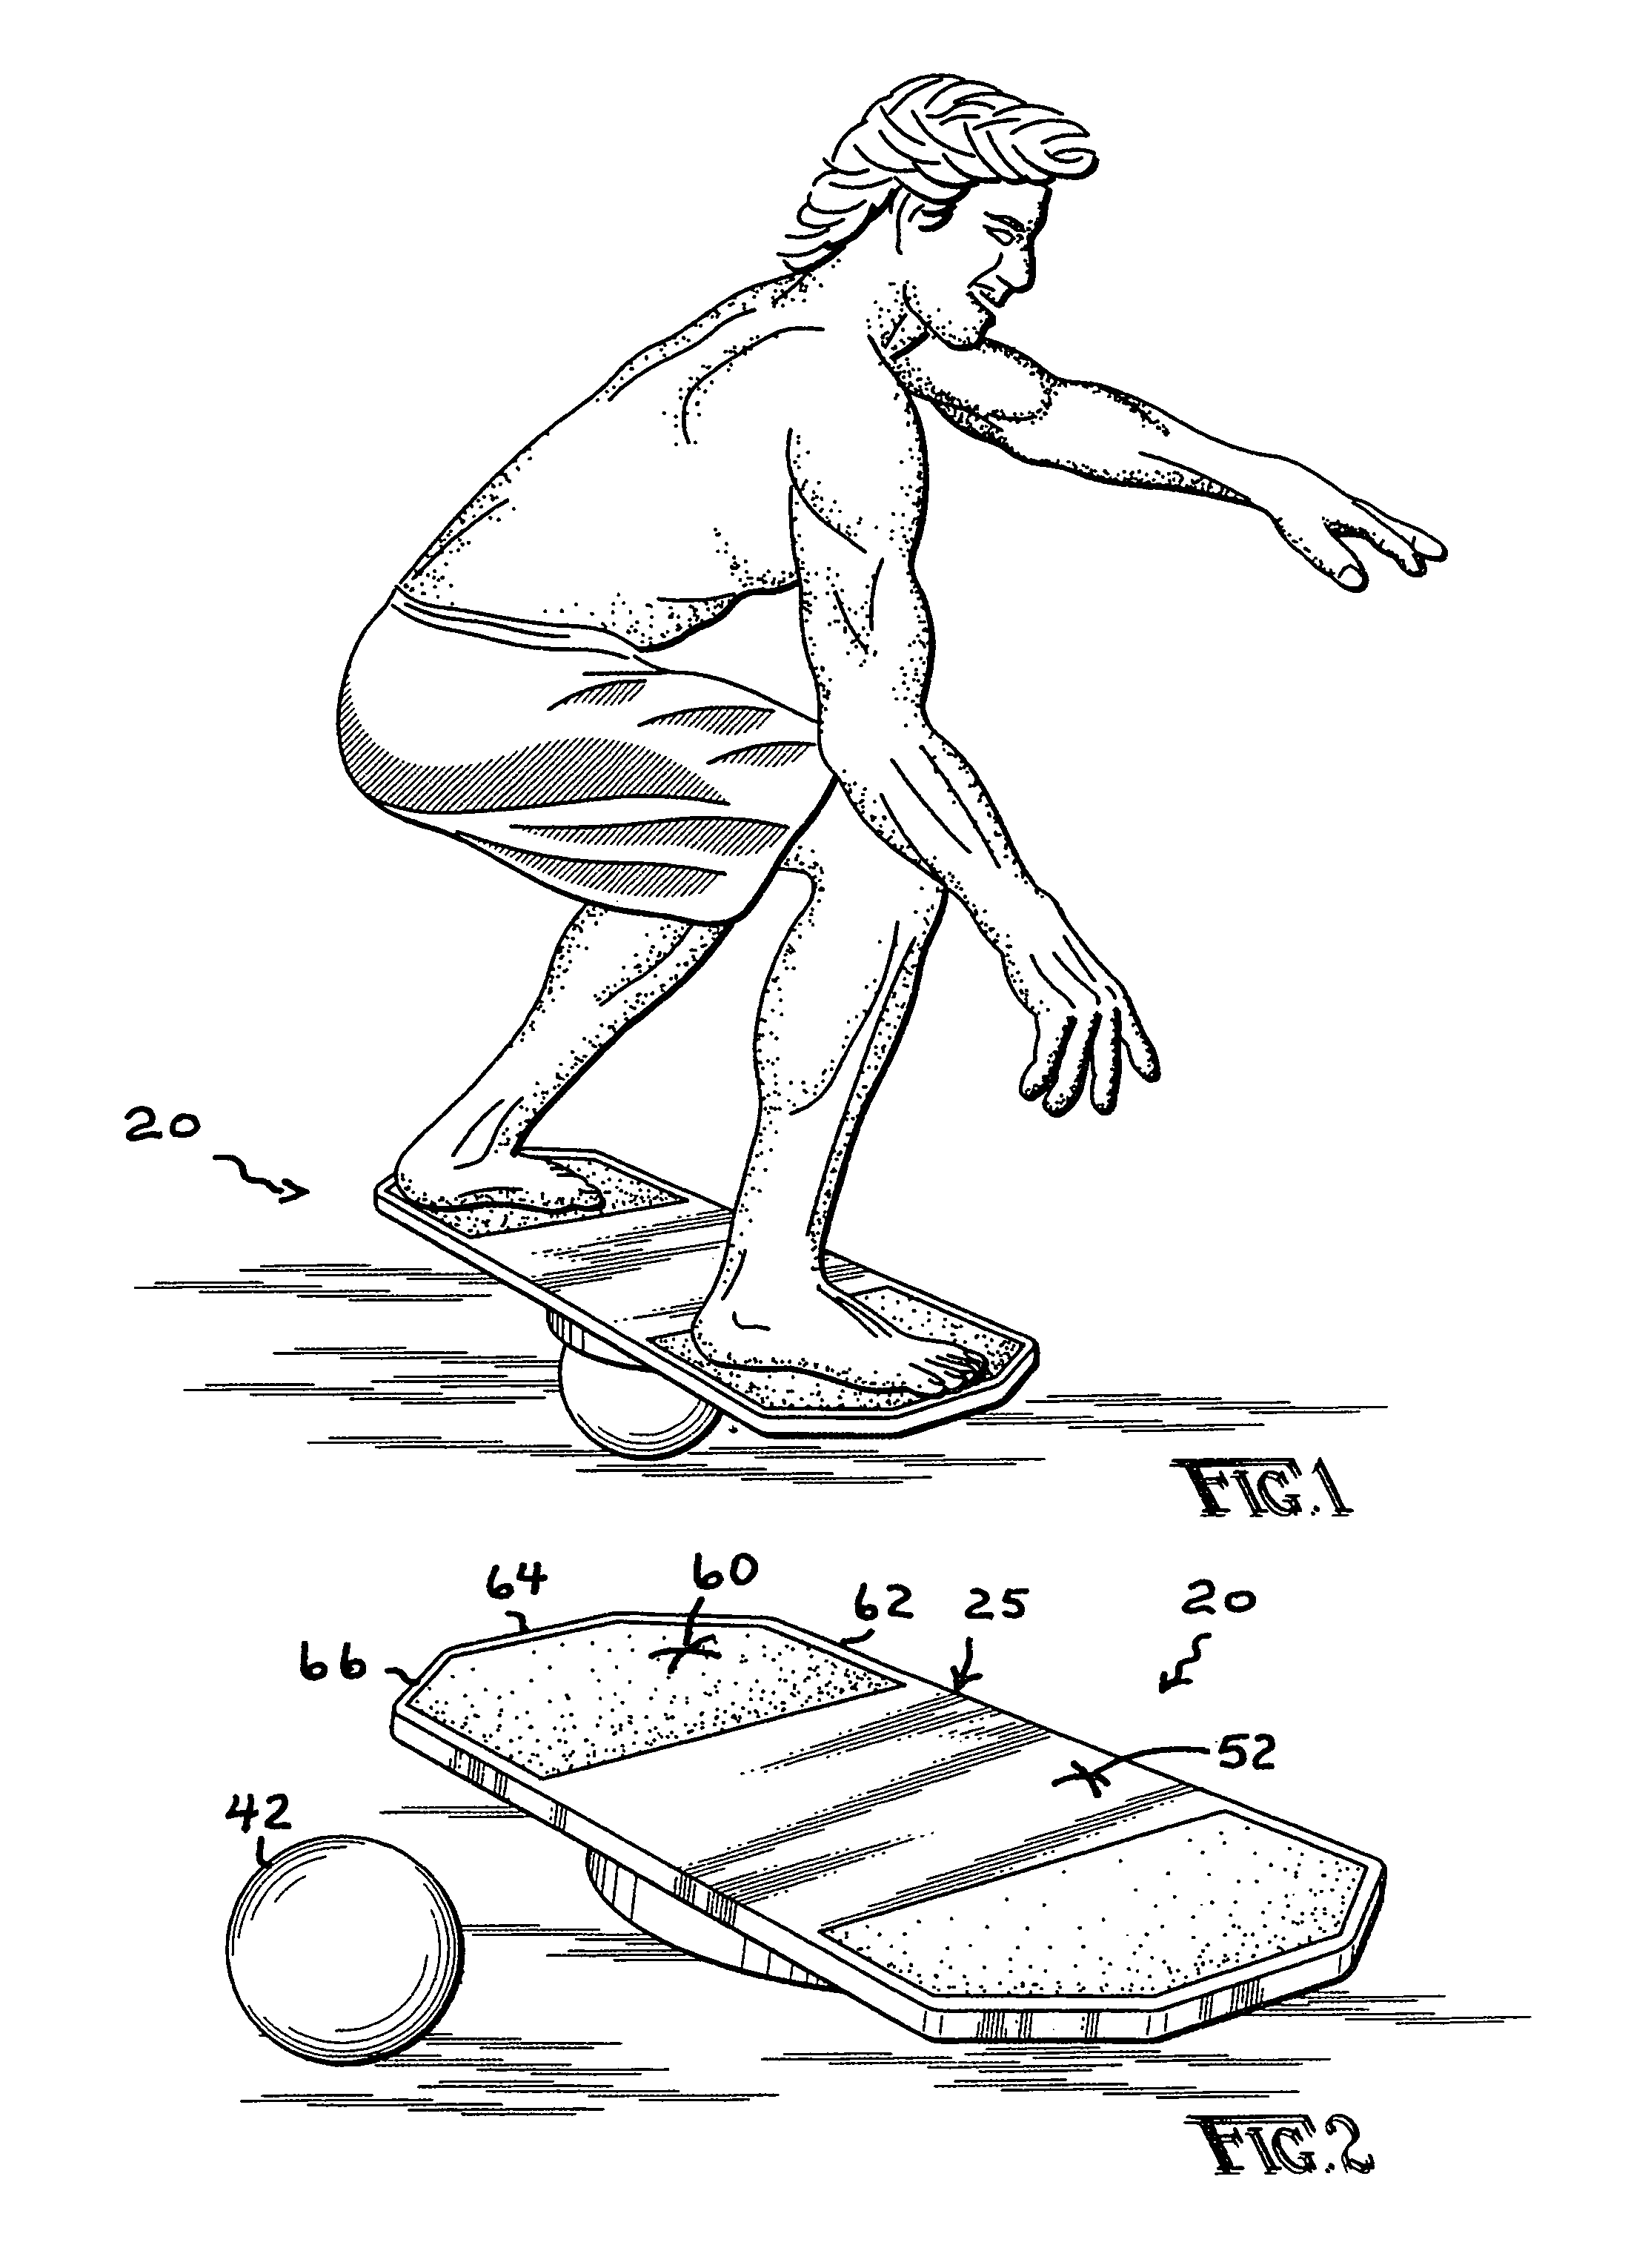 Balance training apparatus, and over and under combination